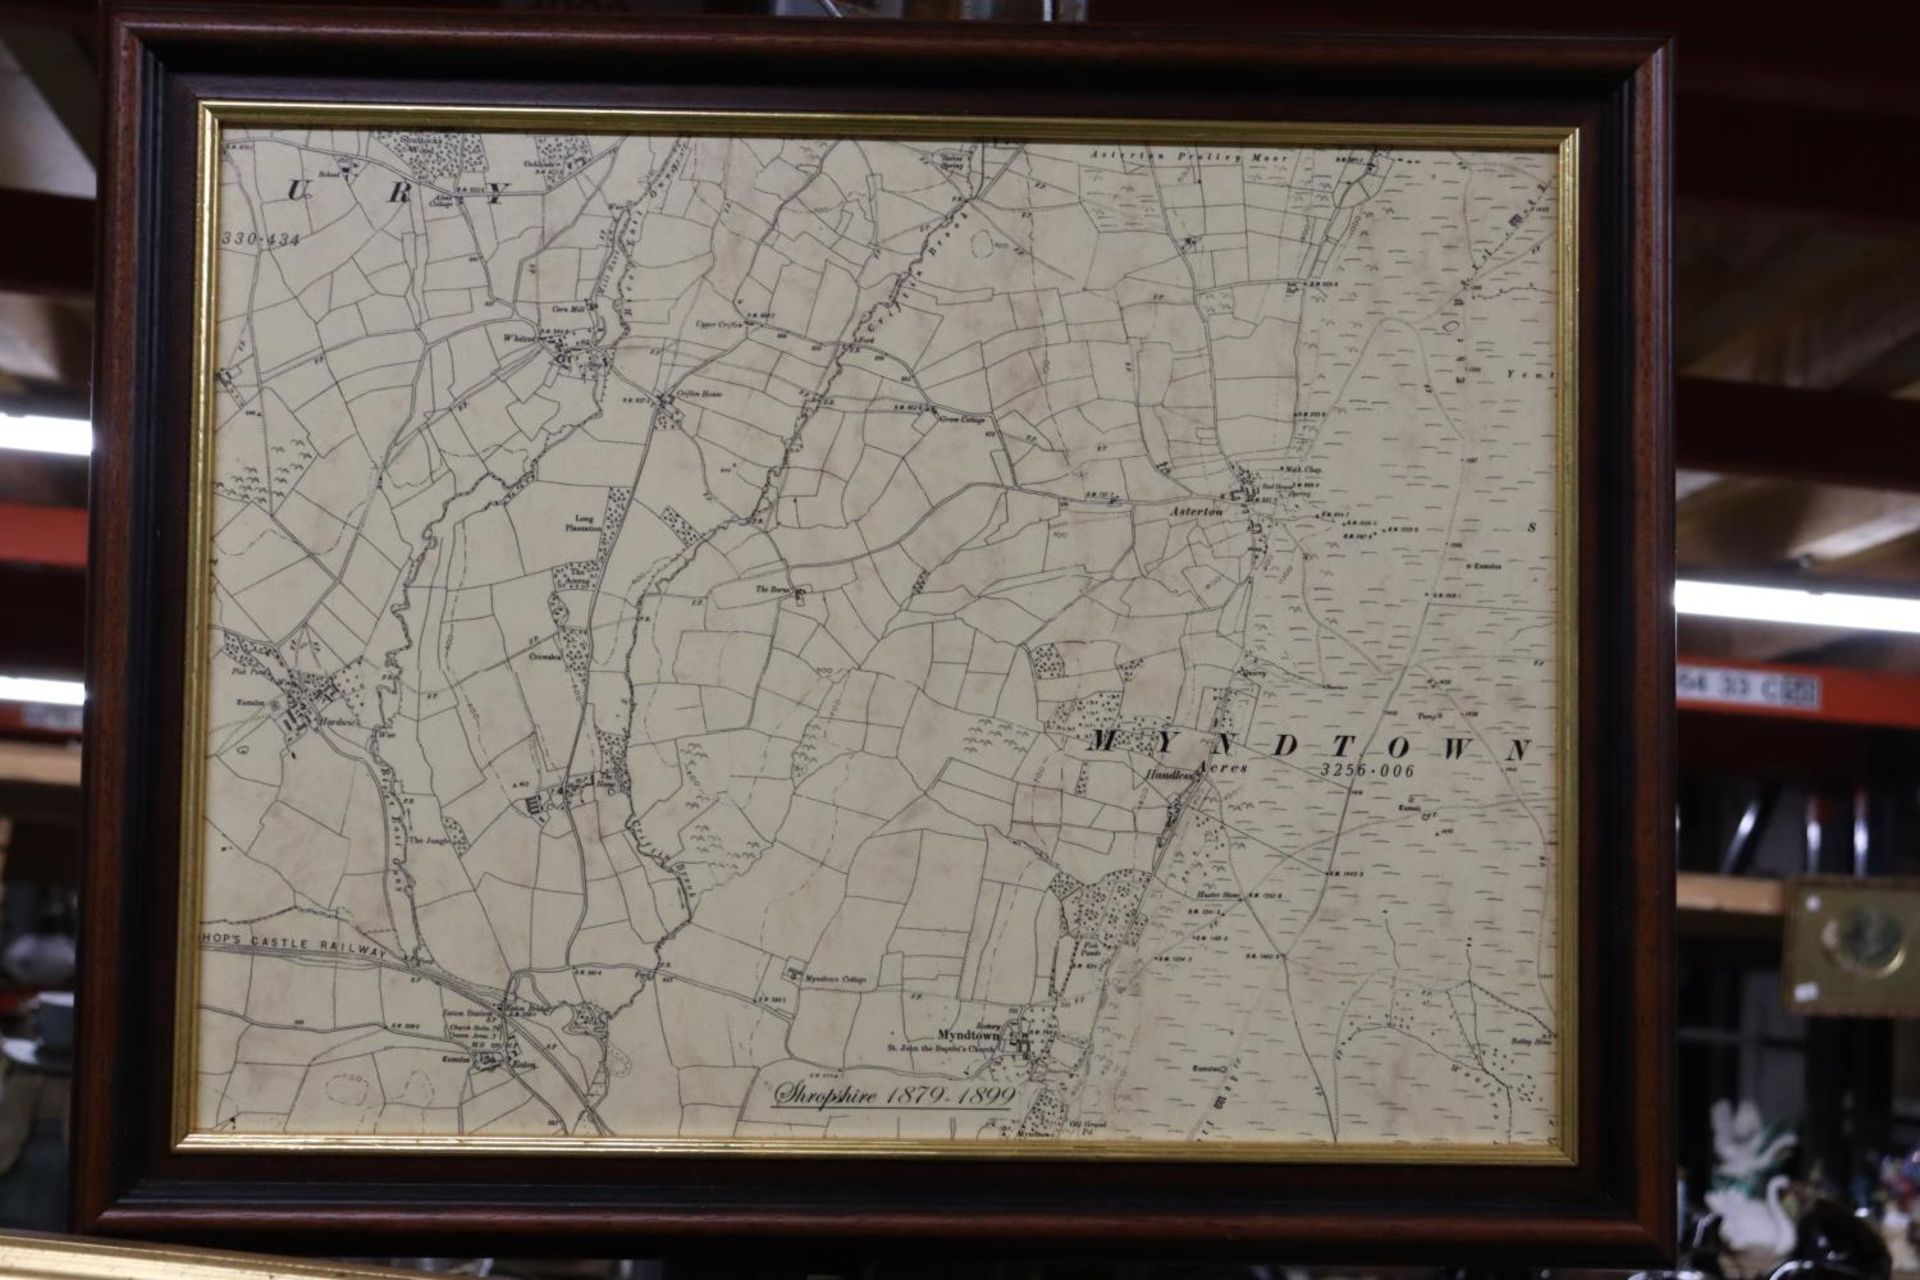 TWO FRAMED MAPS, ONE OF SHROPSHIRE 1879-1899, THE OTHER A PRINT OF SAXTON'S MAP OF ENGLAND AND - Bild 2 aus 5